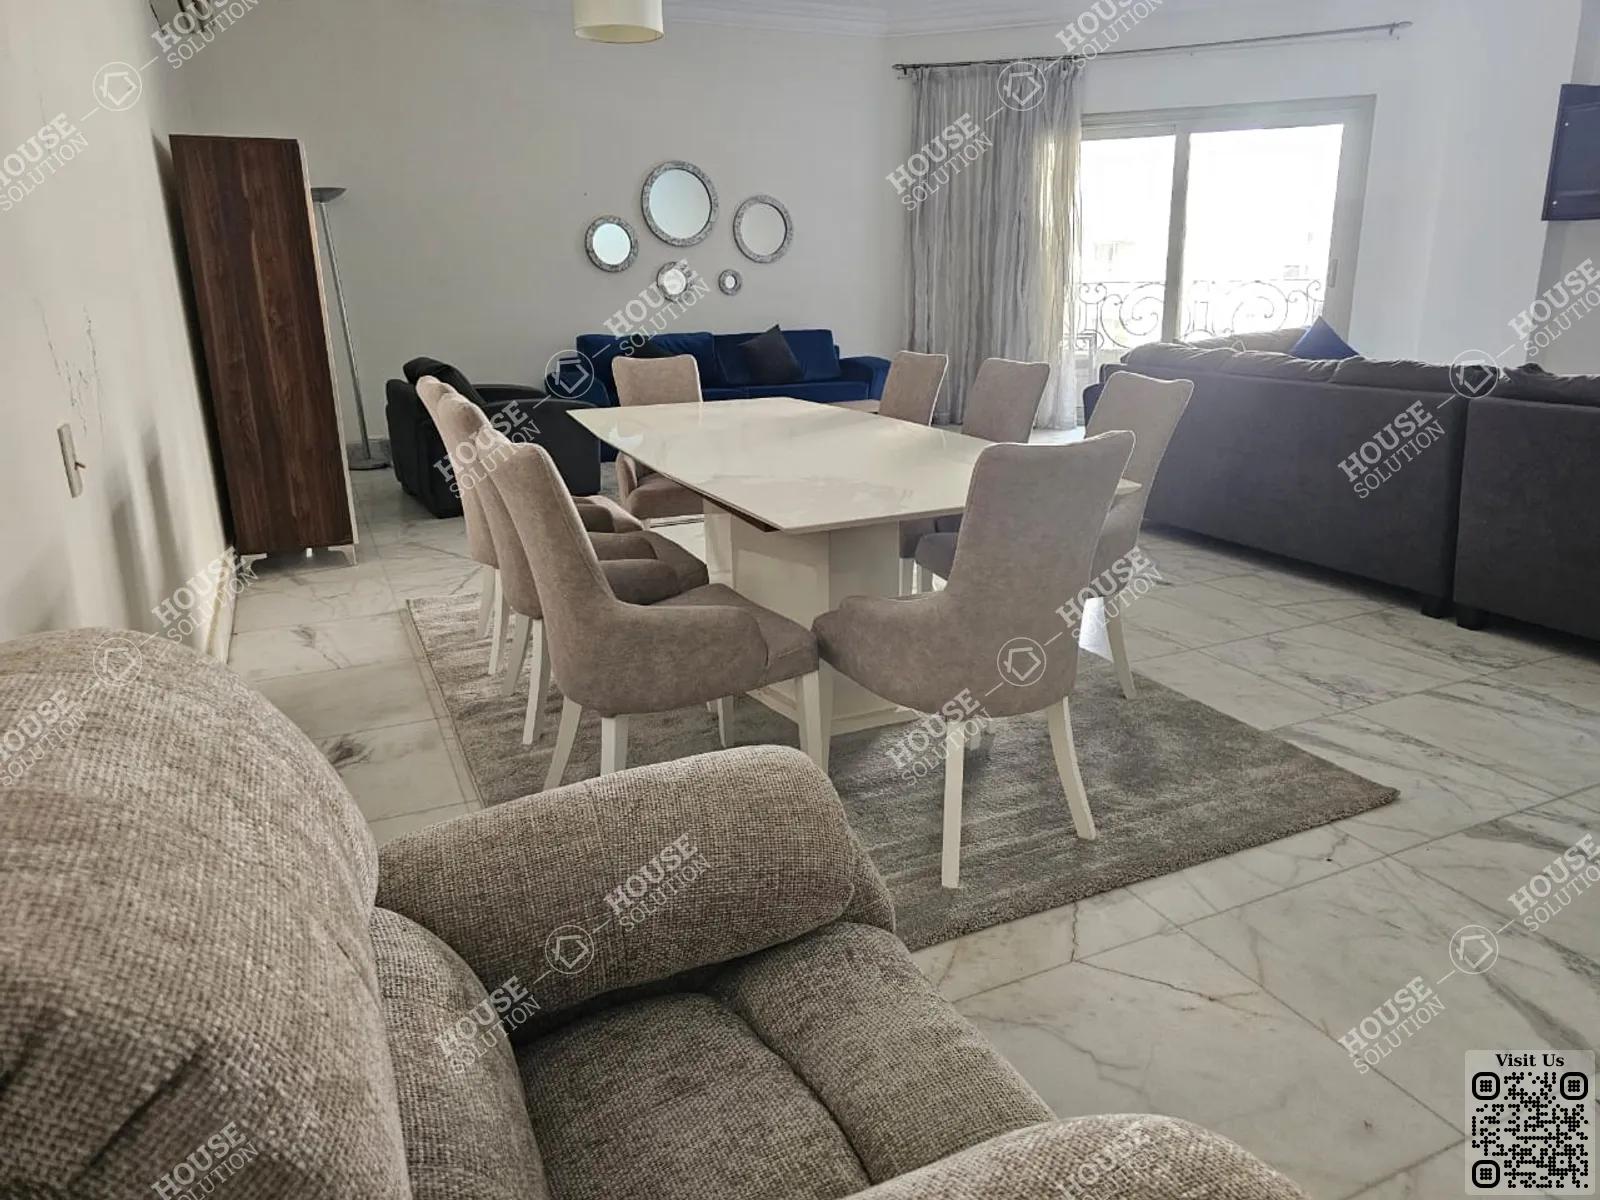 DINING AREA @ Apartments For Rent In Maadi Maadi Sarayat Area: 185 m² consists of 3 Bedrooms 3 Bathrooms Modern furnished 5 stars #5868-1